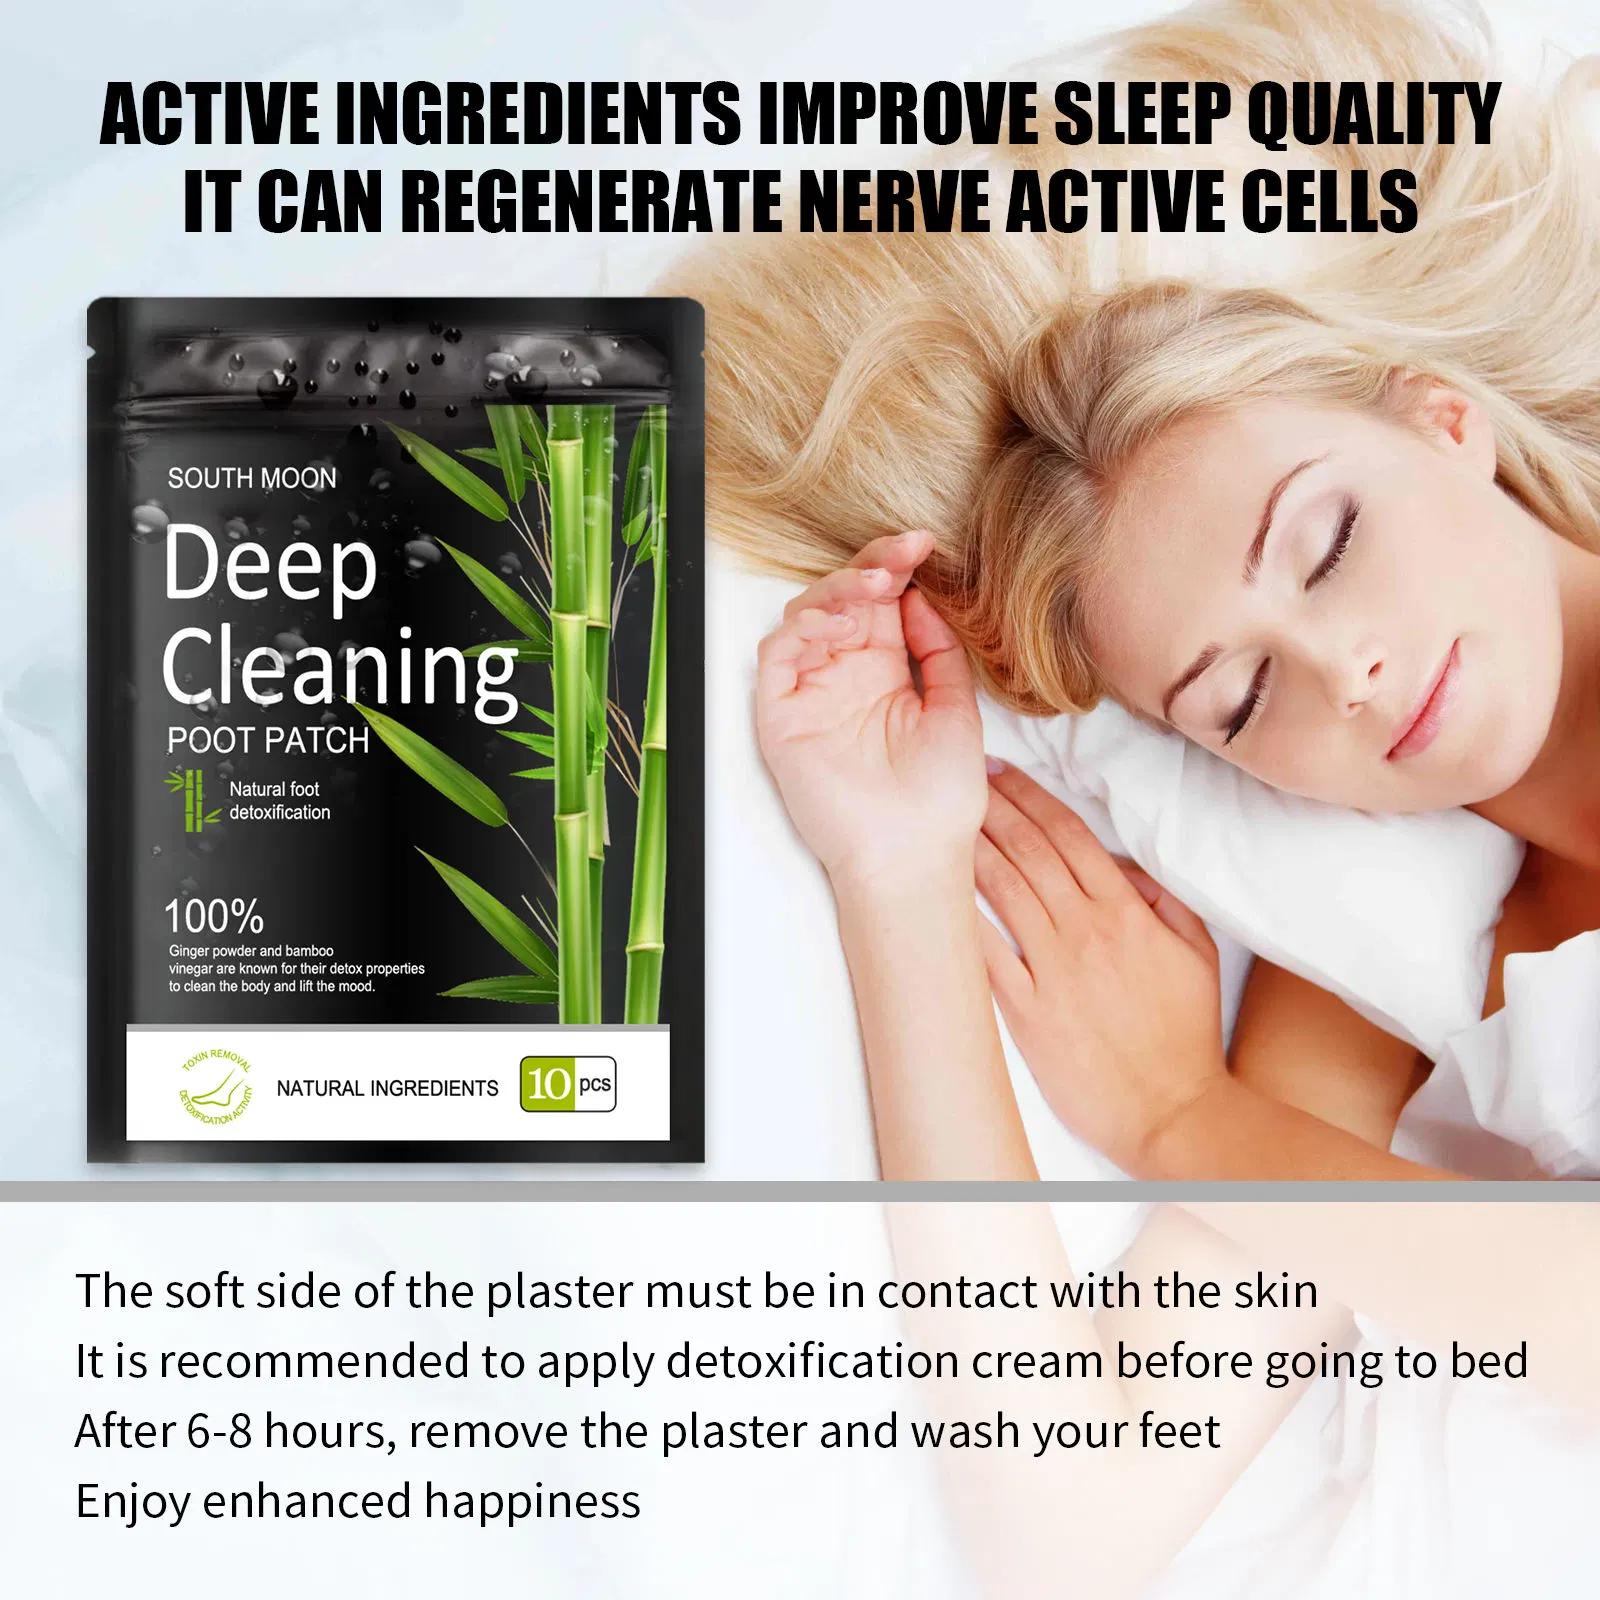 Natural Foot Detoxification Patch Improving Sleep Rapid Beauty Slimming Health Care Stress Pads